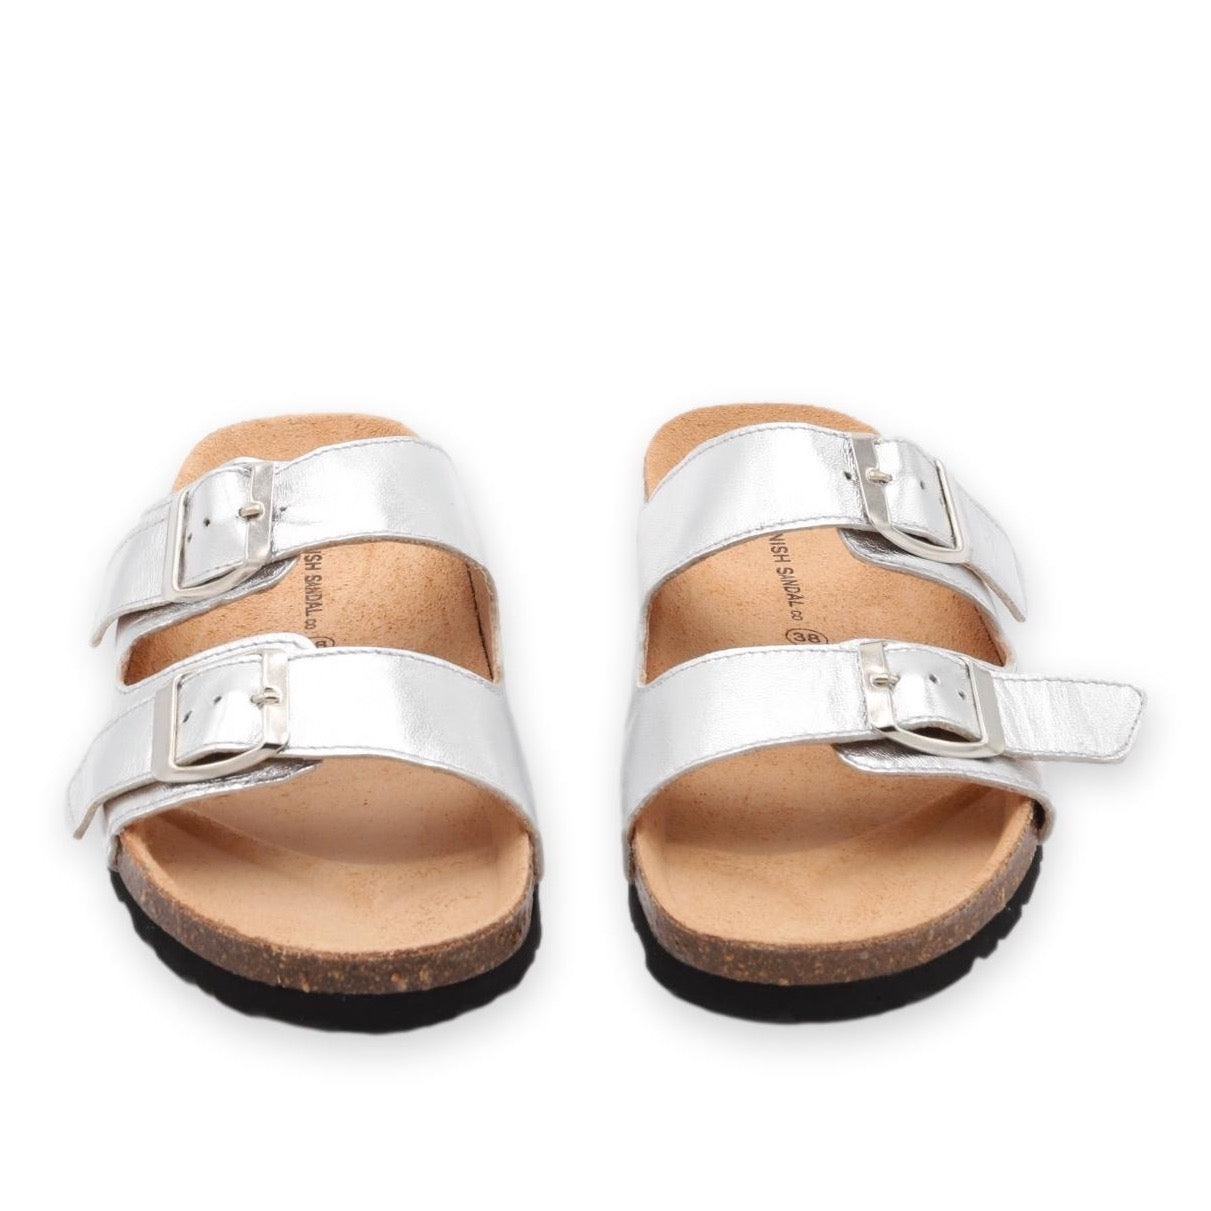 Nordic Silver sandals